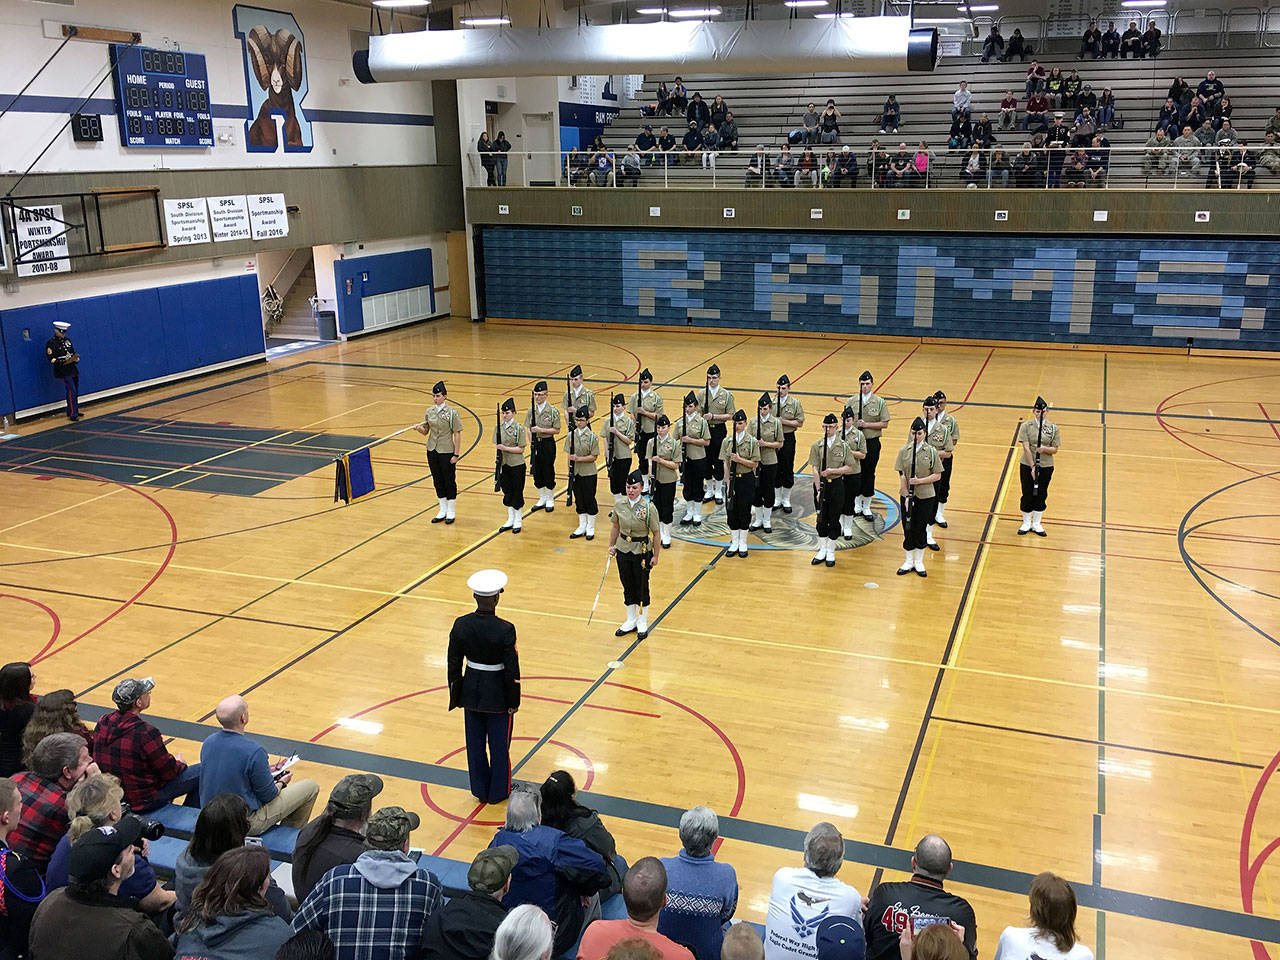 Port Angeles High School Naval Junior Reserve Officer Training Corps cadets claimed the award of “Overall State Champion” at the recent Northwest Drill & Rifle State Championship at Rogers High School in Puyallup. (Port Angeles School District)